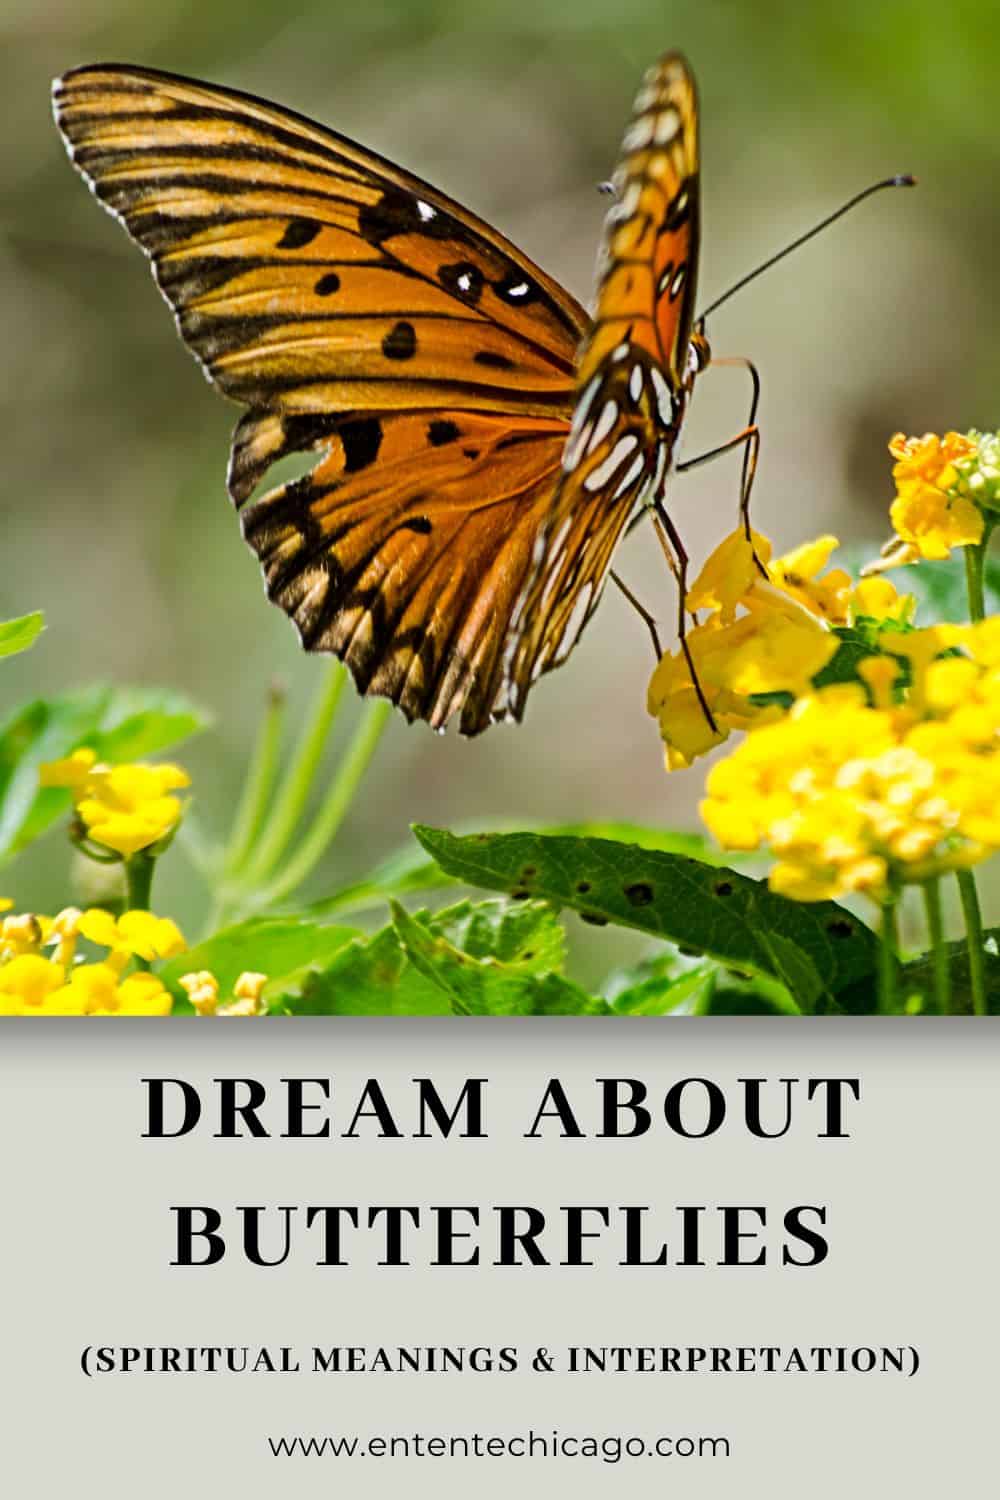 What does it mean when you dream about butterflies